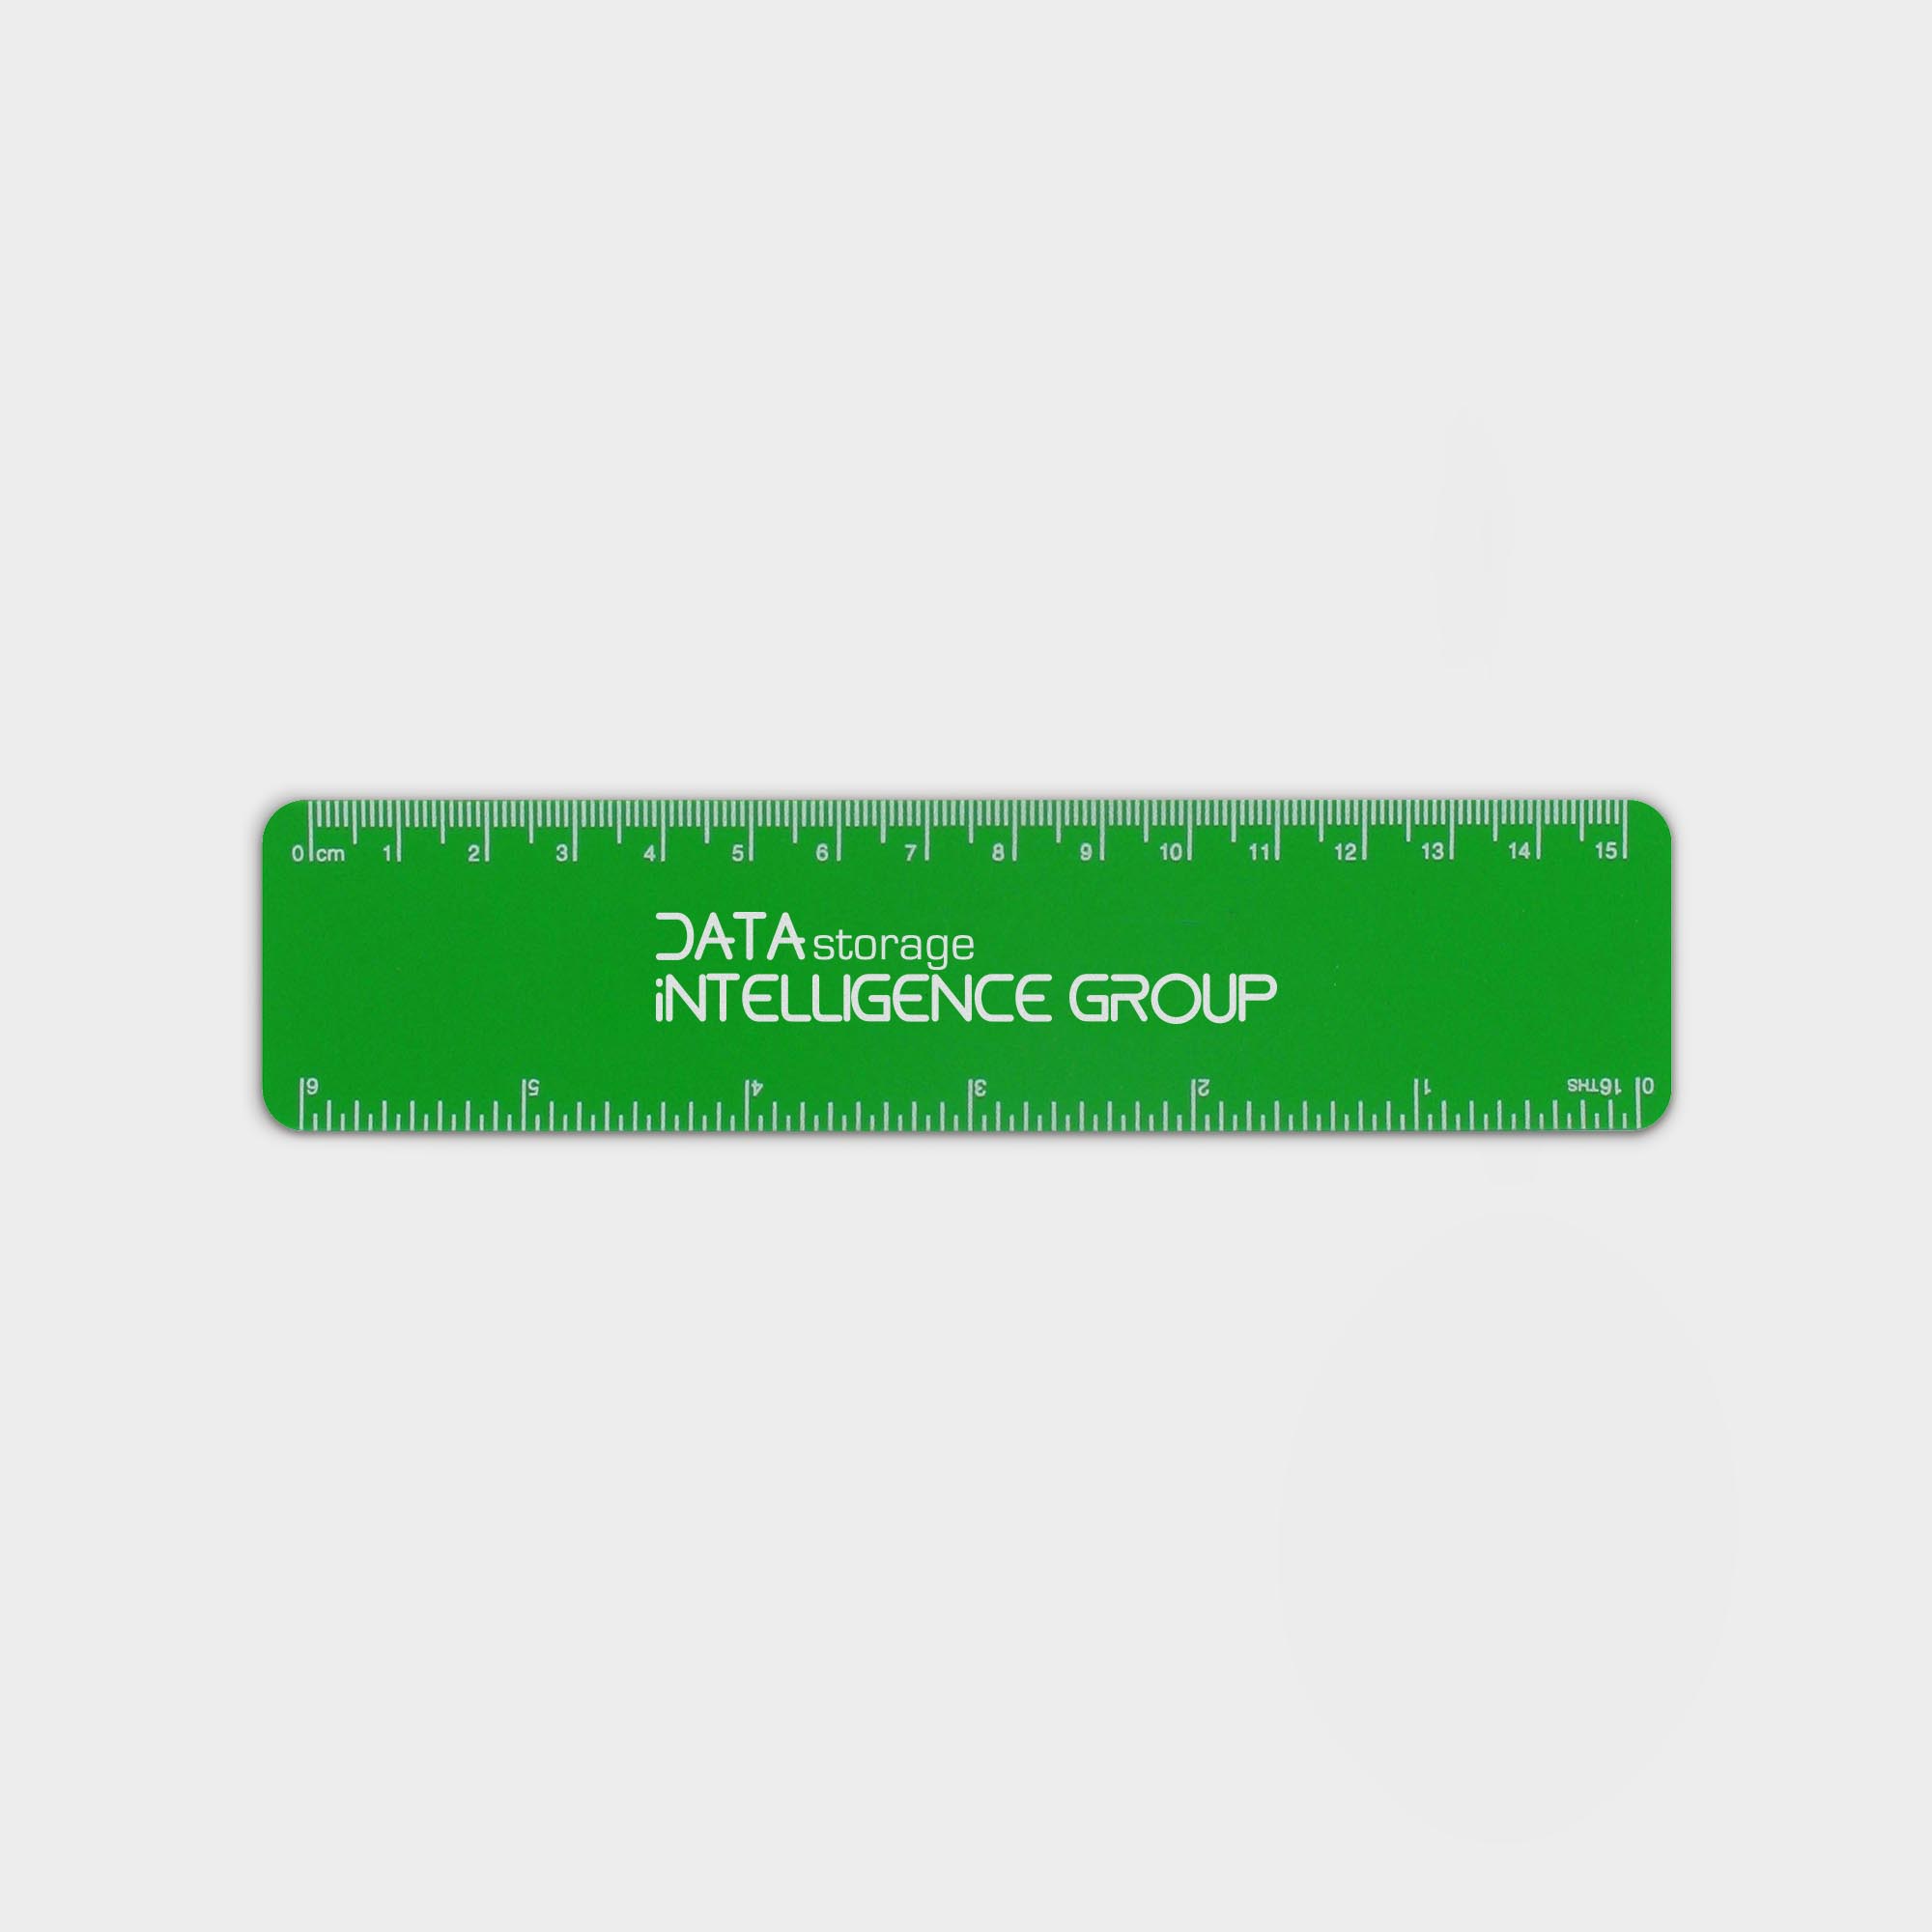 The Green & Good 15cm Flexi Ruler is made from recycled polypropylene. Made in the UK, it is very thin and light, perfect for mailers and as a give-away. Available in a selection of colours. 1 colour print only as standard. Digital print is only available on the white ruler. Green